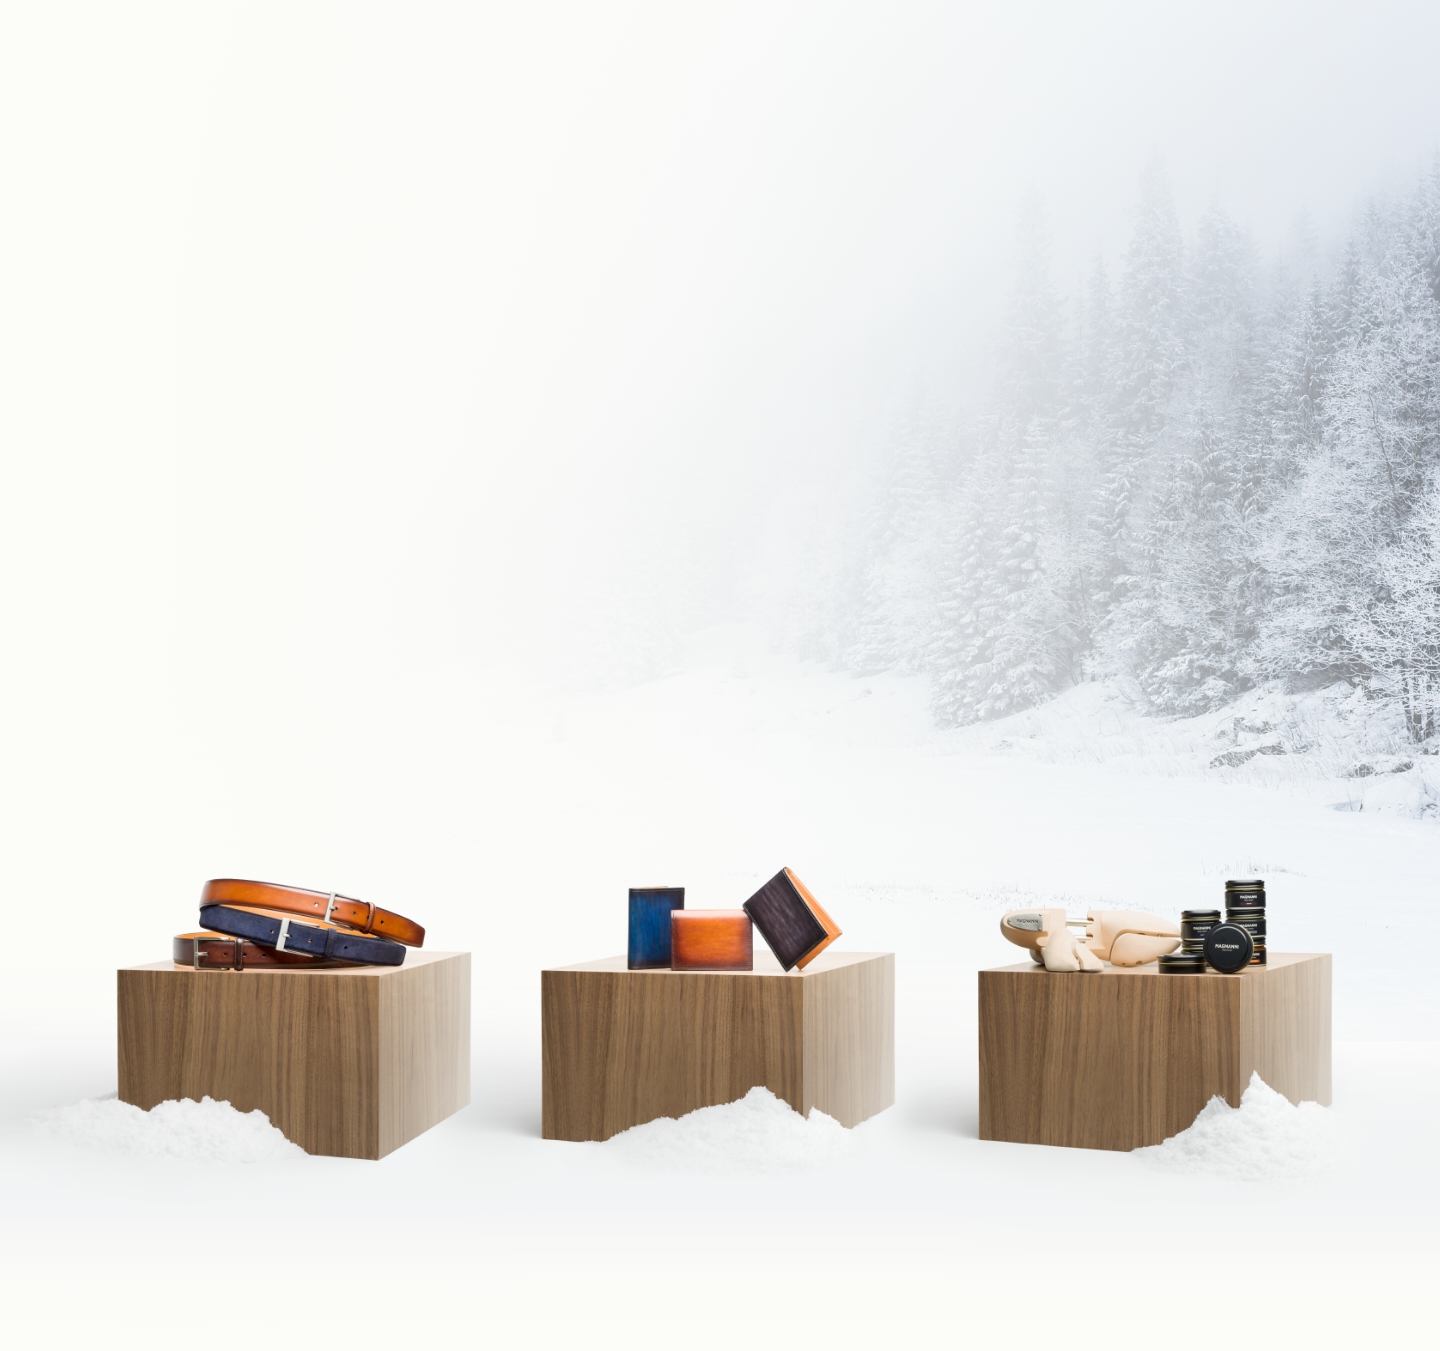 Magnanni accessories sit on wooden platforms in a snowy environment.